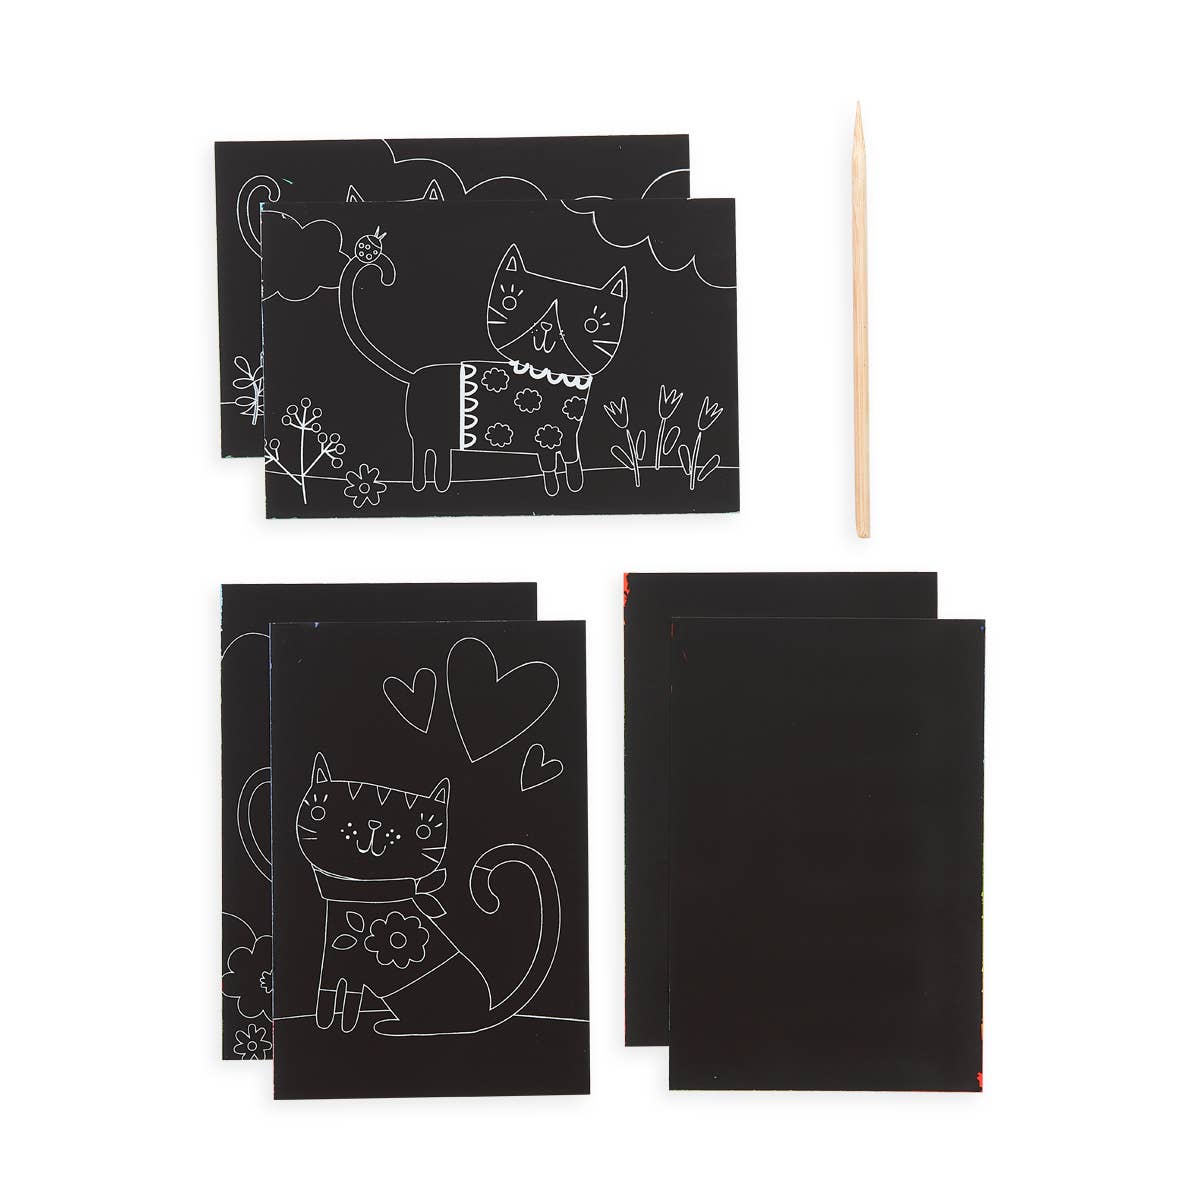 Mini Scratch & Scribble Art Kit | Cutie Cats-Drawing + Painting-OOLY-Sister Shirts, Cute & Custom Tees for Mama & Littles in Trussville, Alabama.